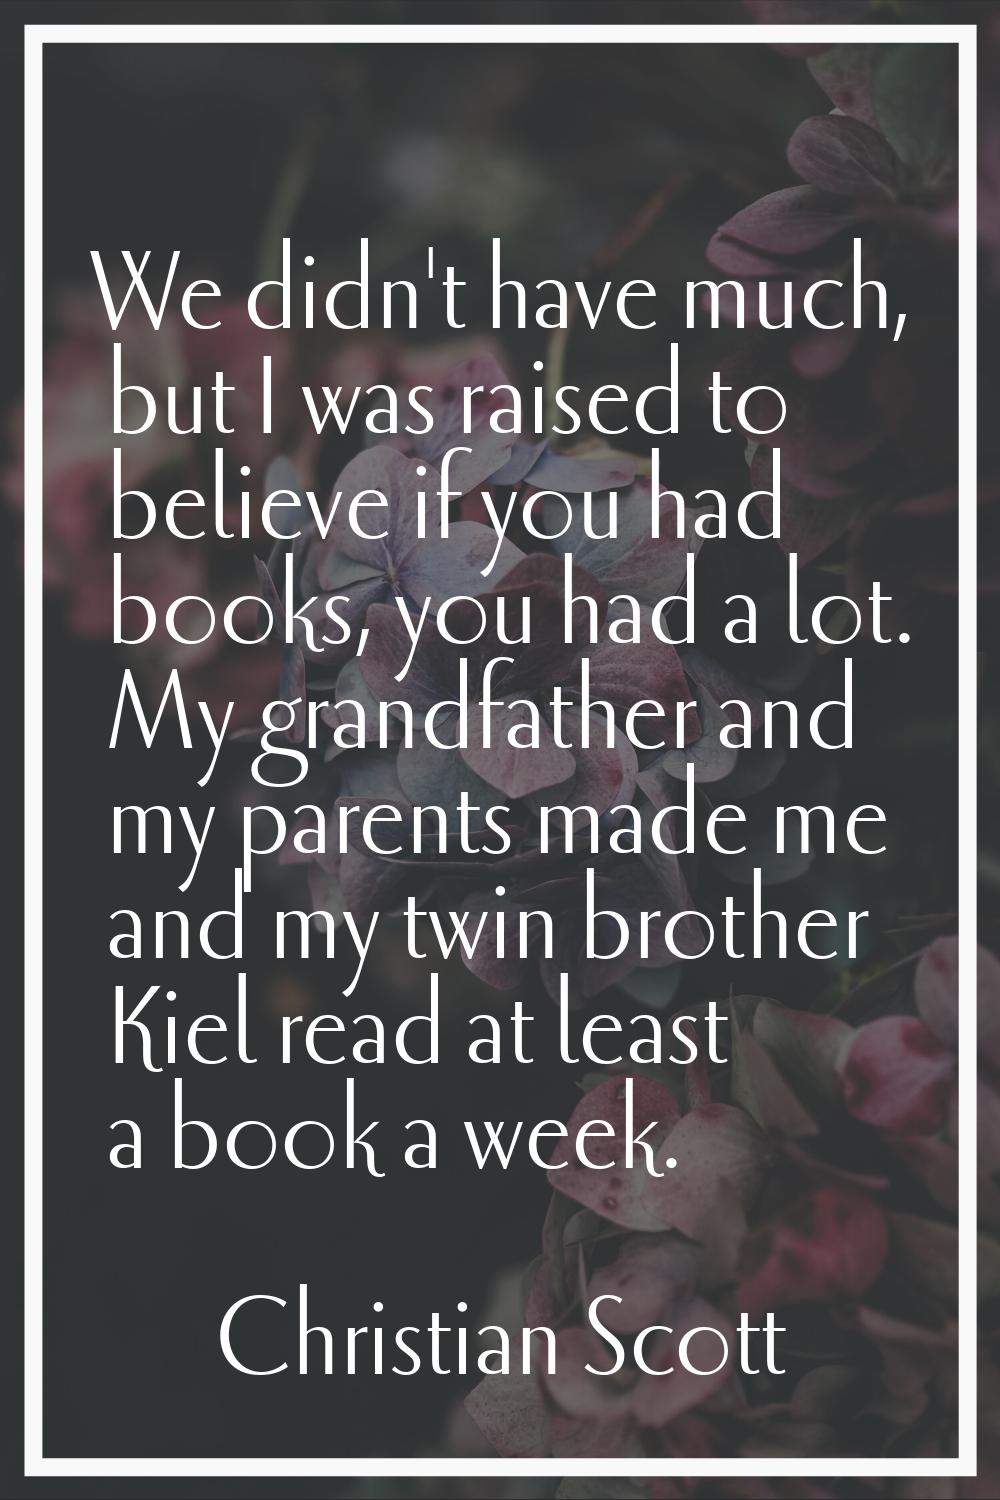 We didn't have much, but I was raised to believe if you had books, you had a lot. My grandfather an